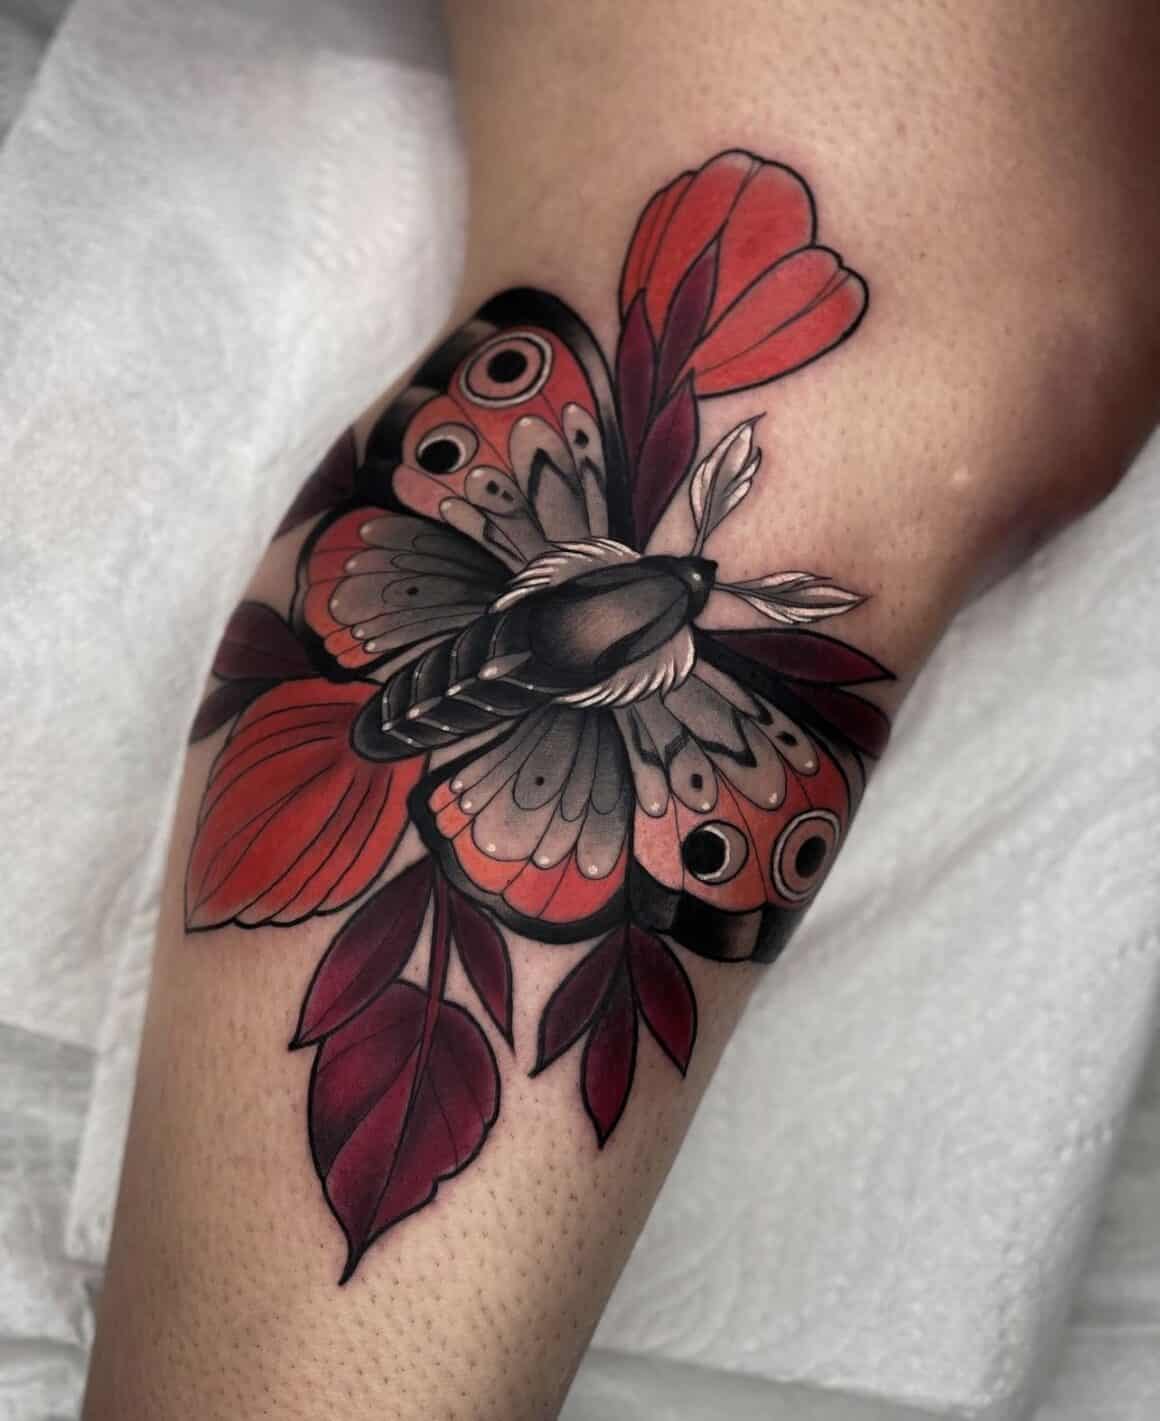 First tattoo with color and shading! Ladybug done by Damon at Seven Sagas  Tattoo in Greensboro NC : r/tattoos